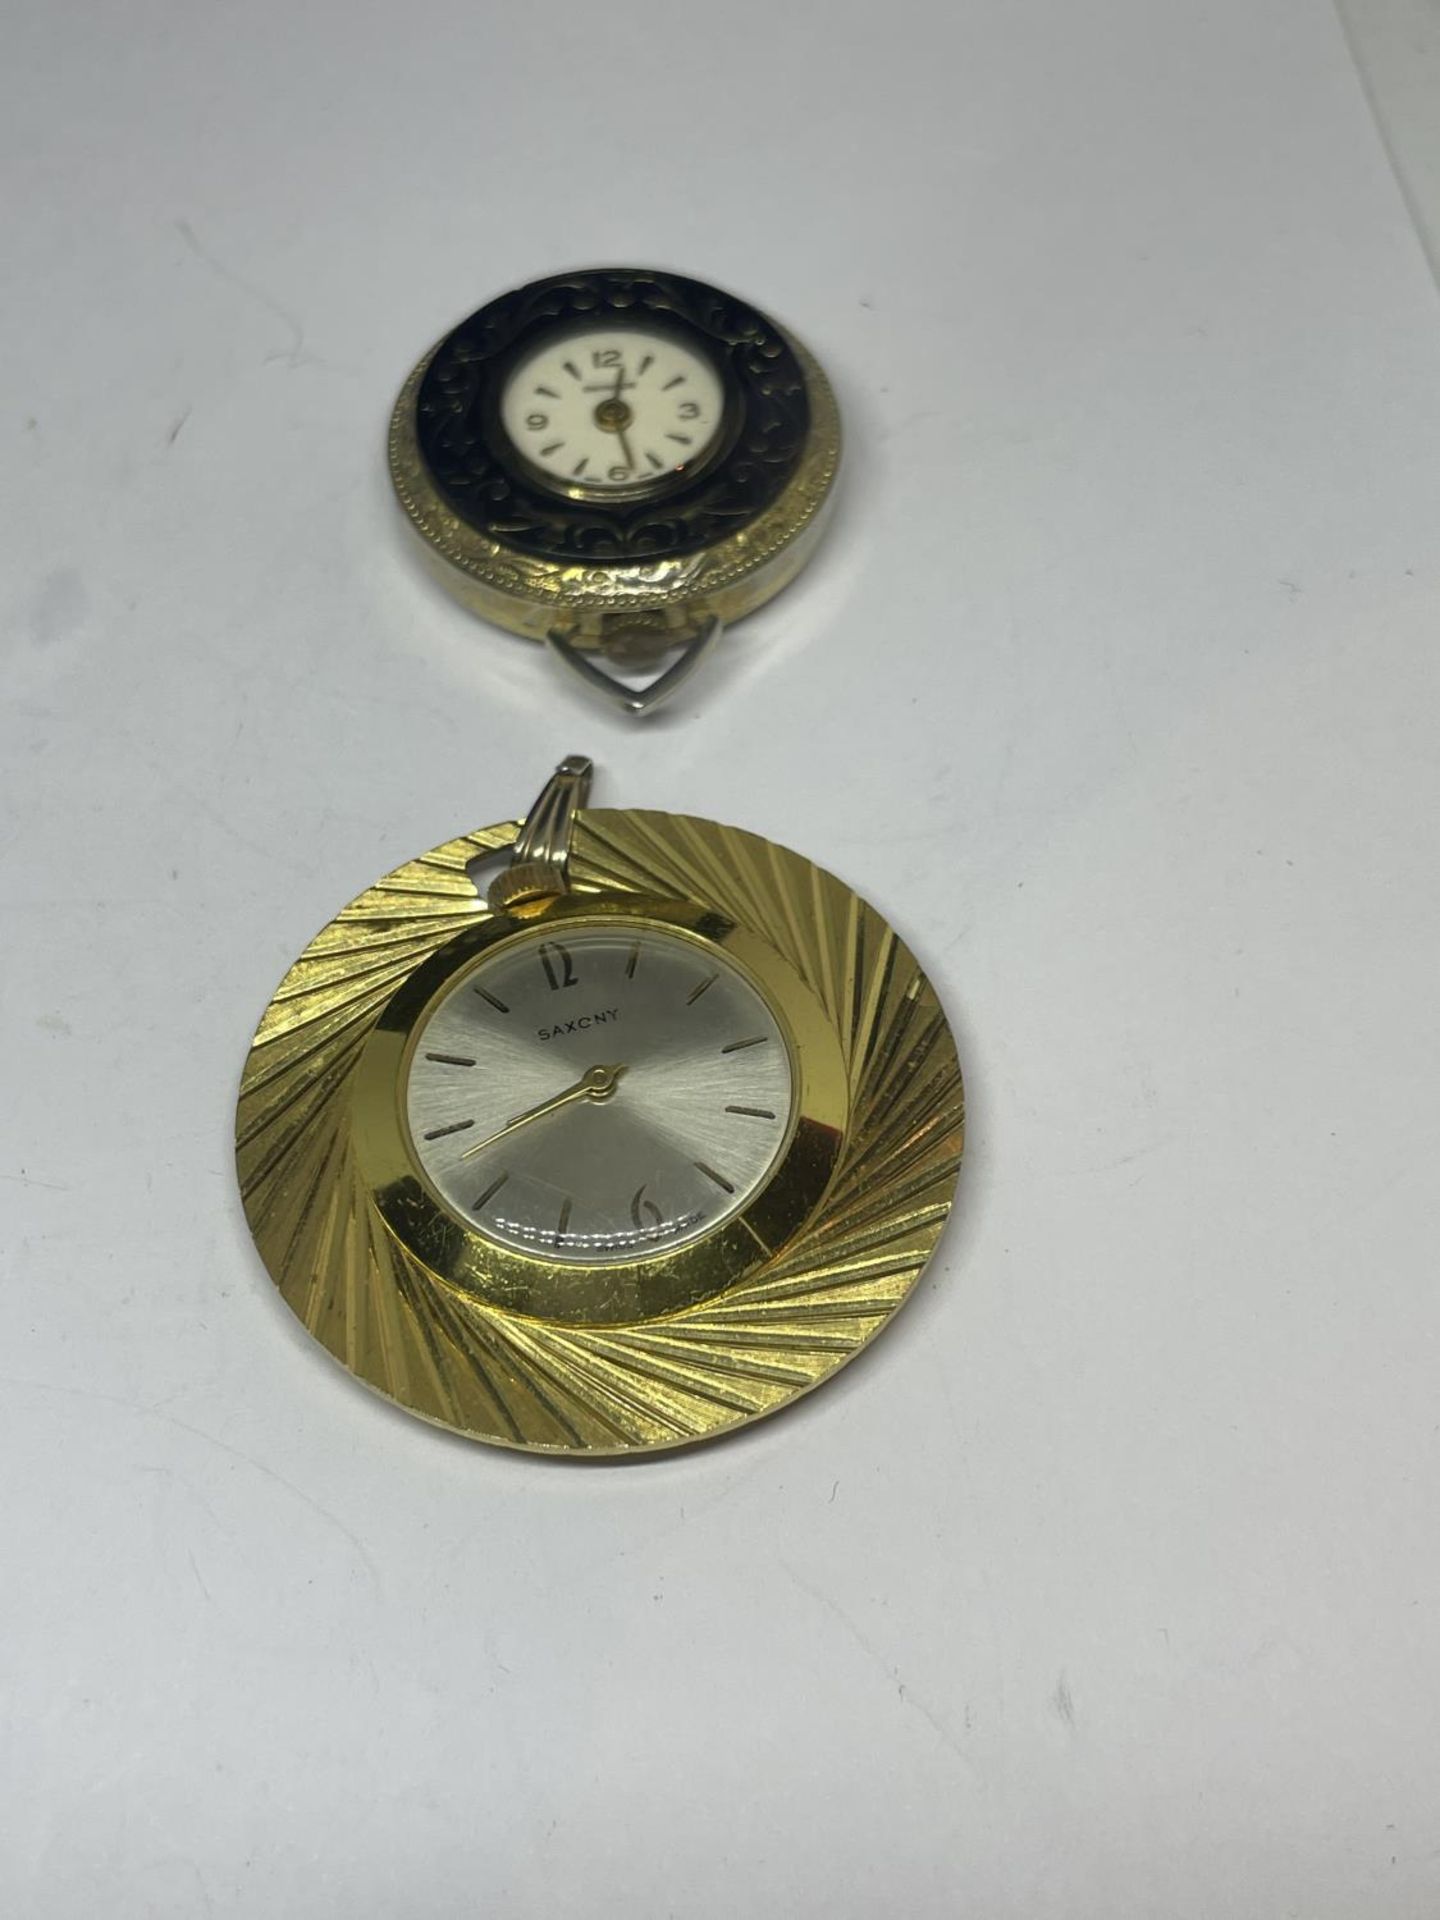 FOUR VARIOUS POCKET AND PENDANT WATCHES TWO SEKONDA SEEN WORKING BUT NO WARRANTY - Image 4 of 5